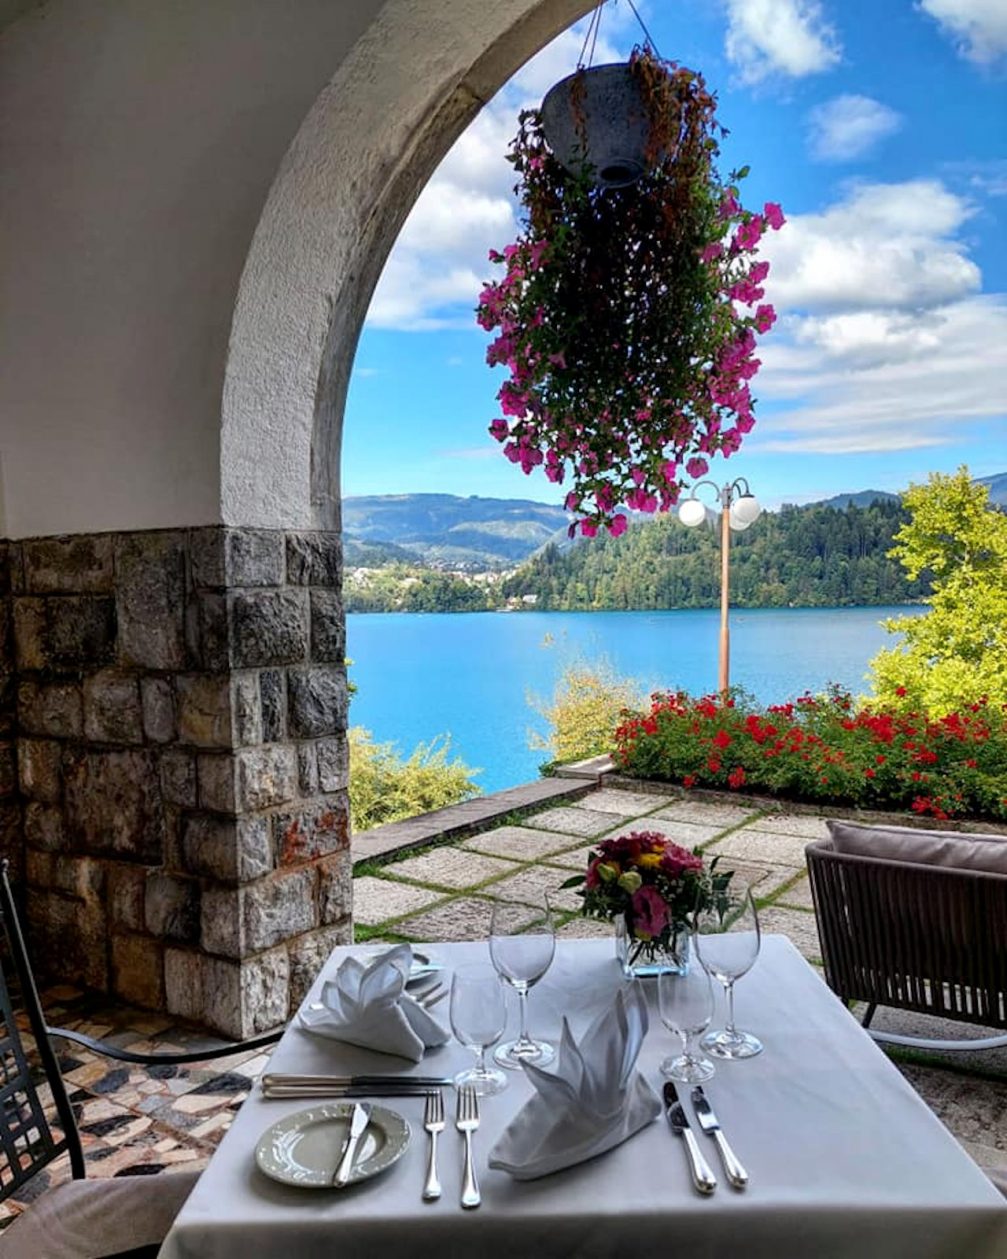 A restaurant at Lake Bled in Slovenia in early fall